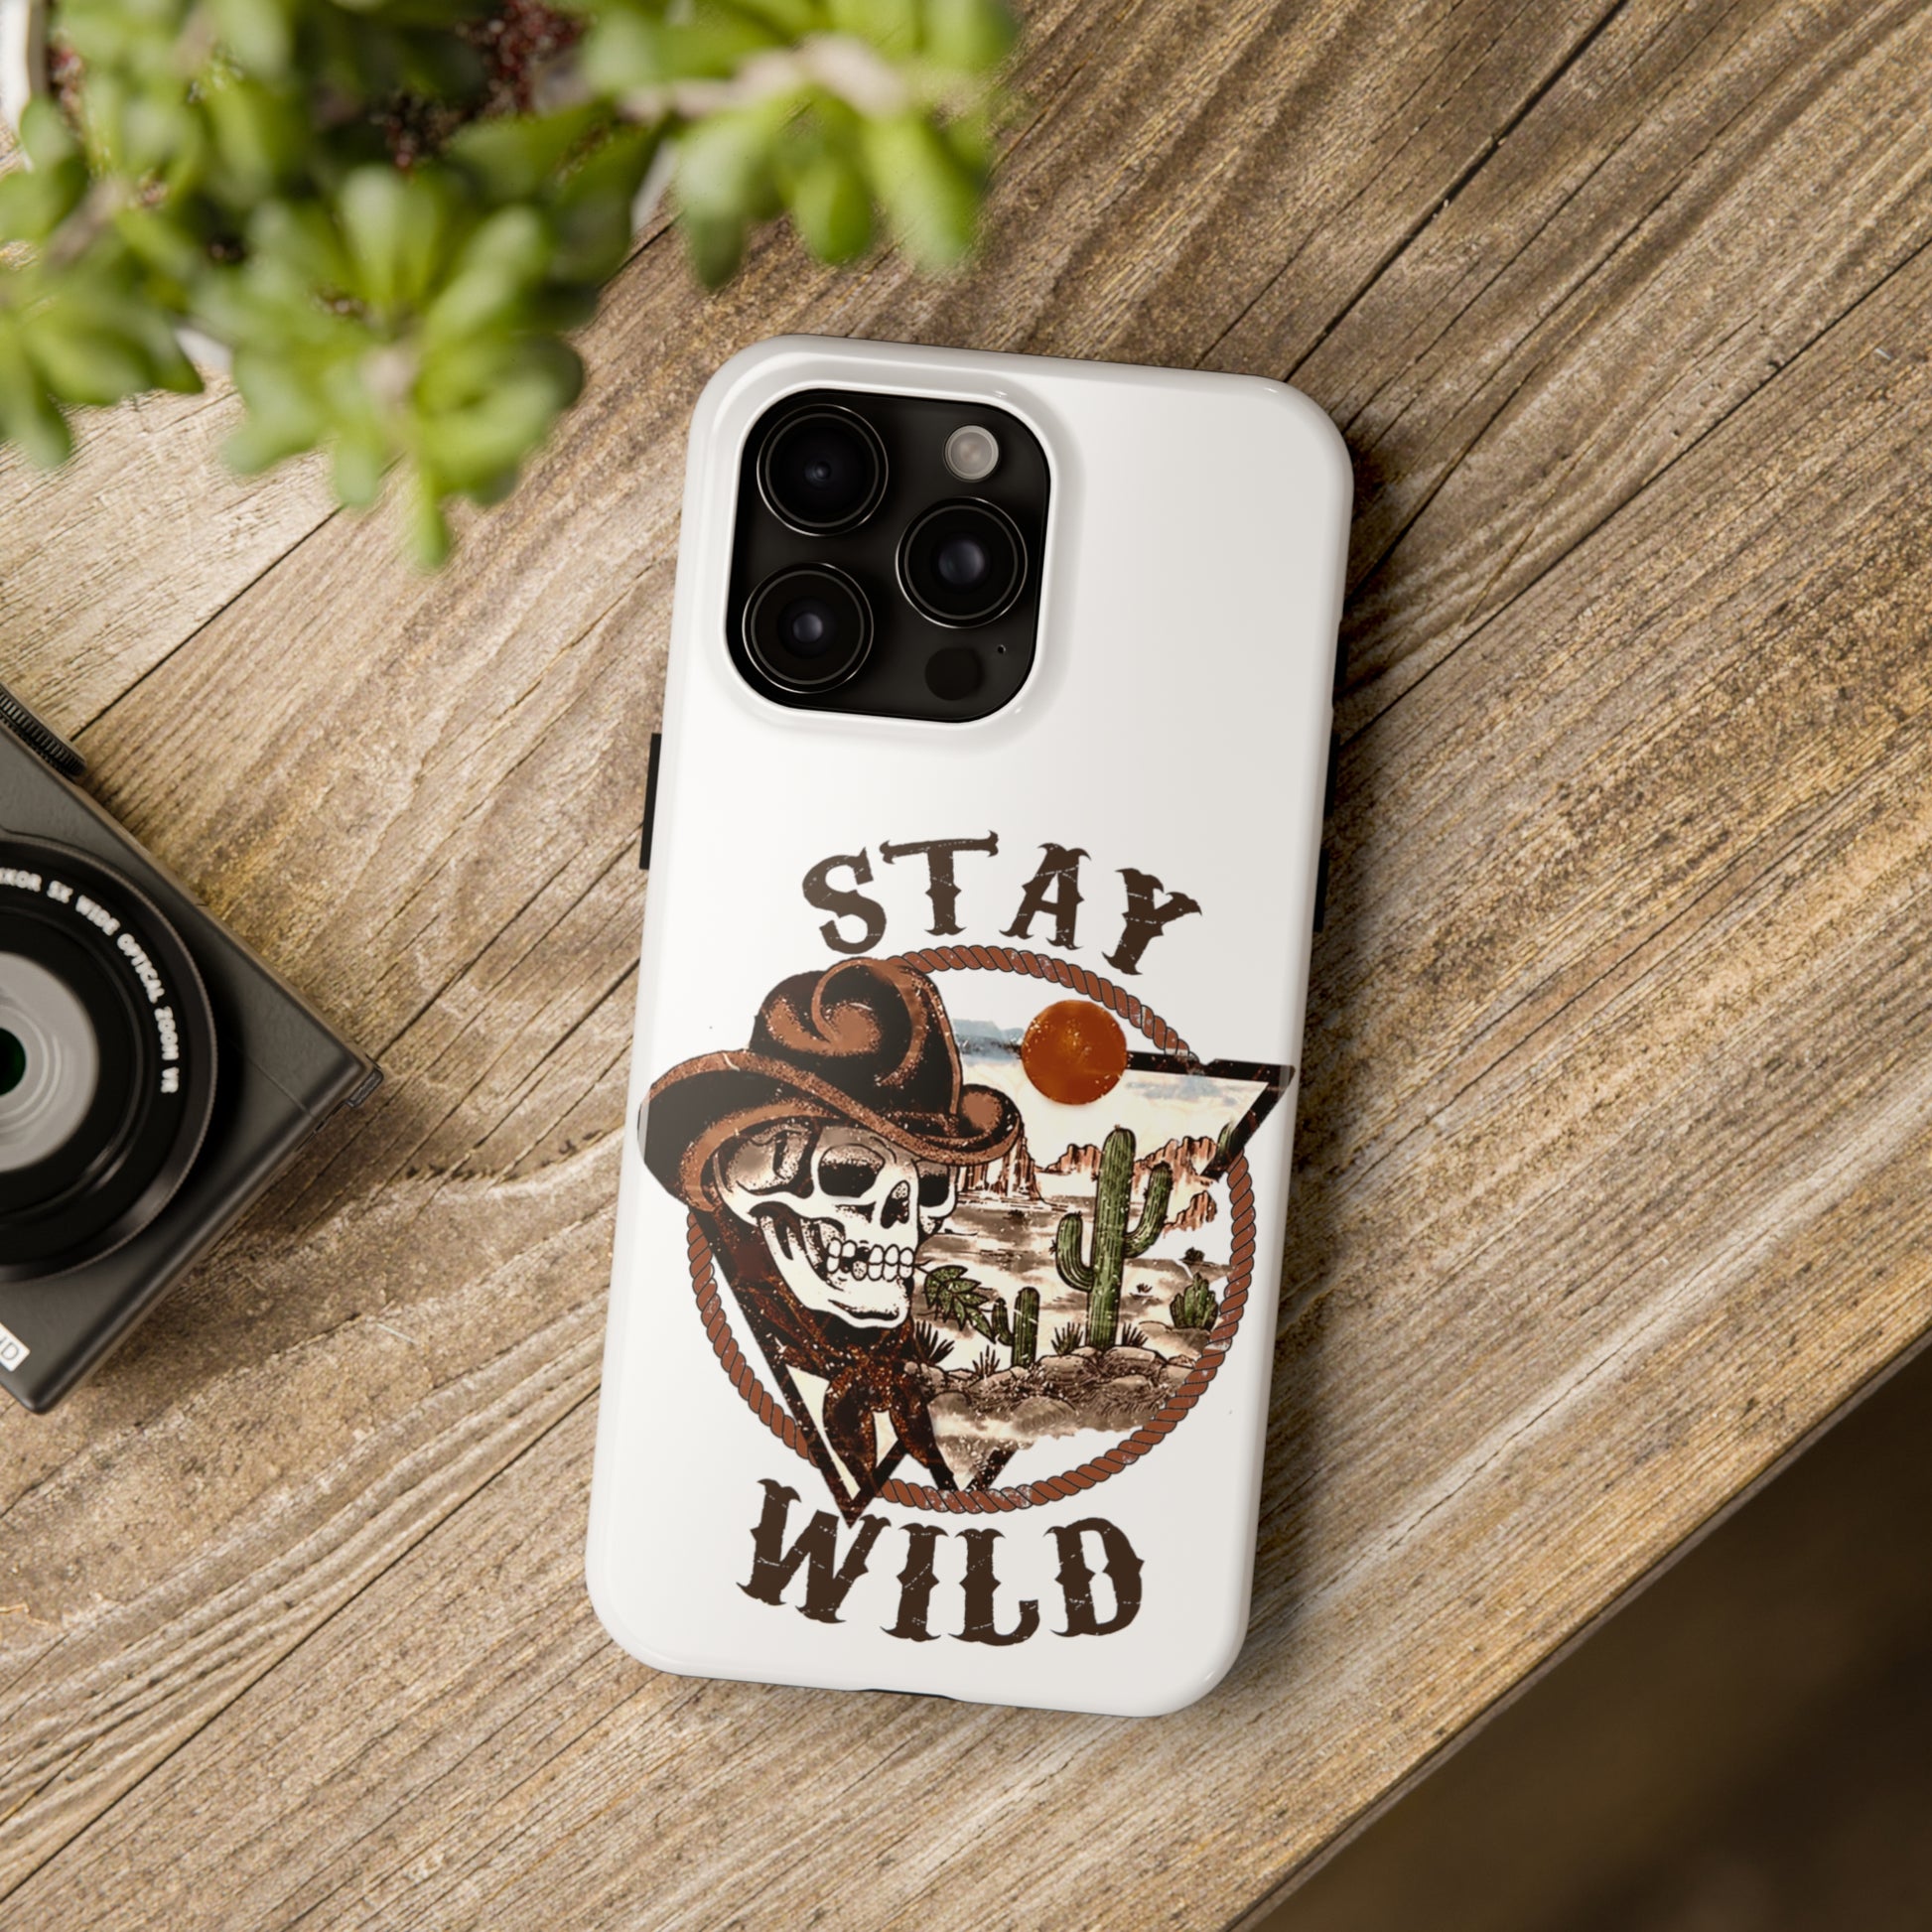 Stay Wild Cowboy Skull: iPhone Tough Case Design - Wireless Charging - Superior Protection - Original Designs by TheGlassyLass.com